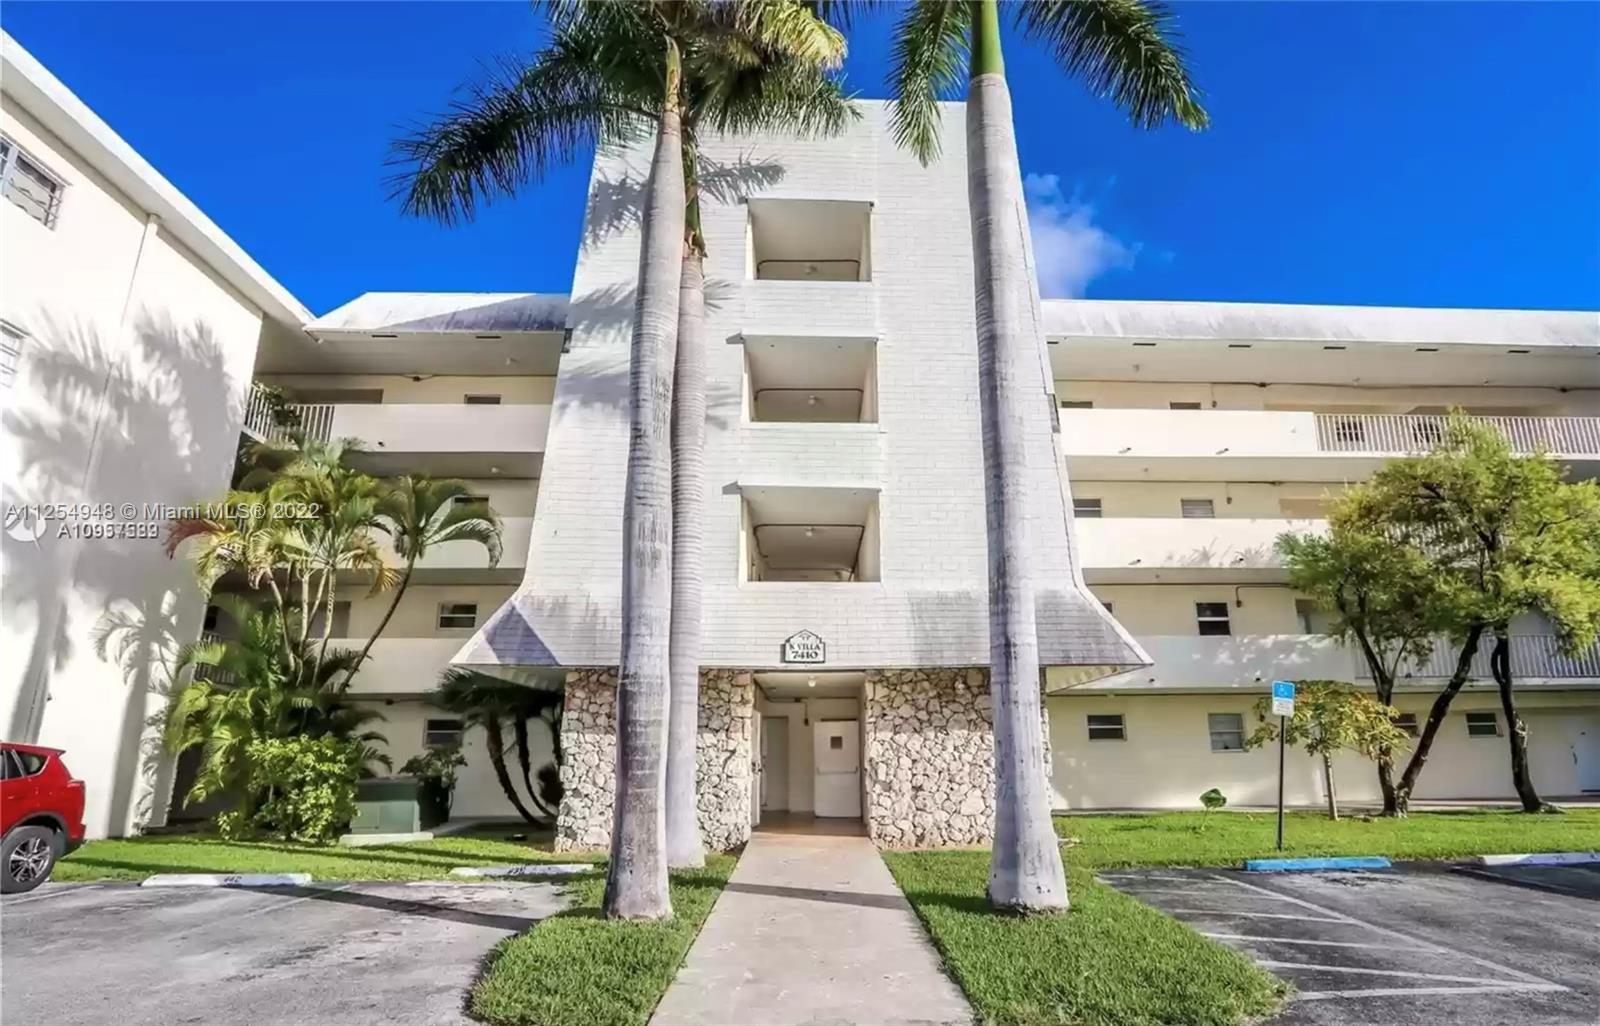 Beautiful 1 Bedroom 1 bath Condo in the heart of Dadeland. Walking distance to the Metro Rail, Dadeland Mall, Restaurants and much more. Easy access to Palmetto to 826.

Great Investment opportunity ! 
Property is currently occupied by a tenant of 6 years @ $1400. with no desire to leave 
(lease ends 02-2023)